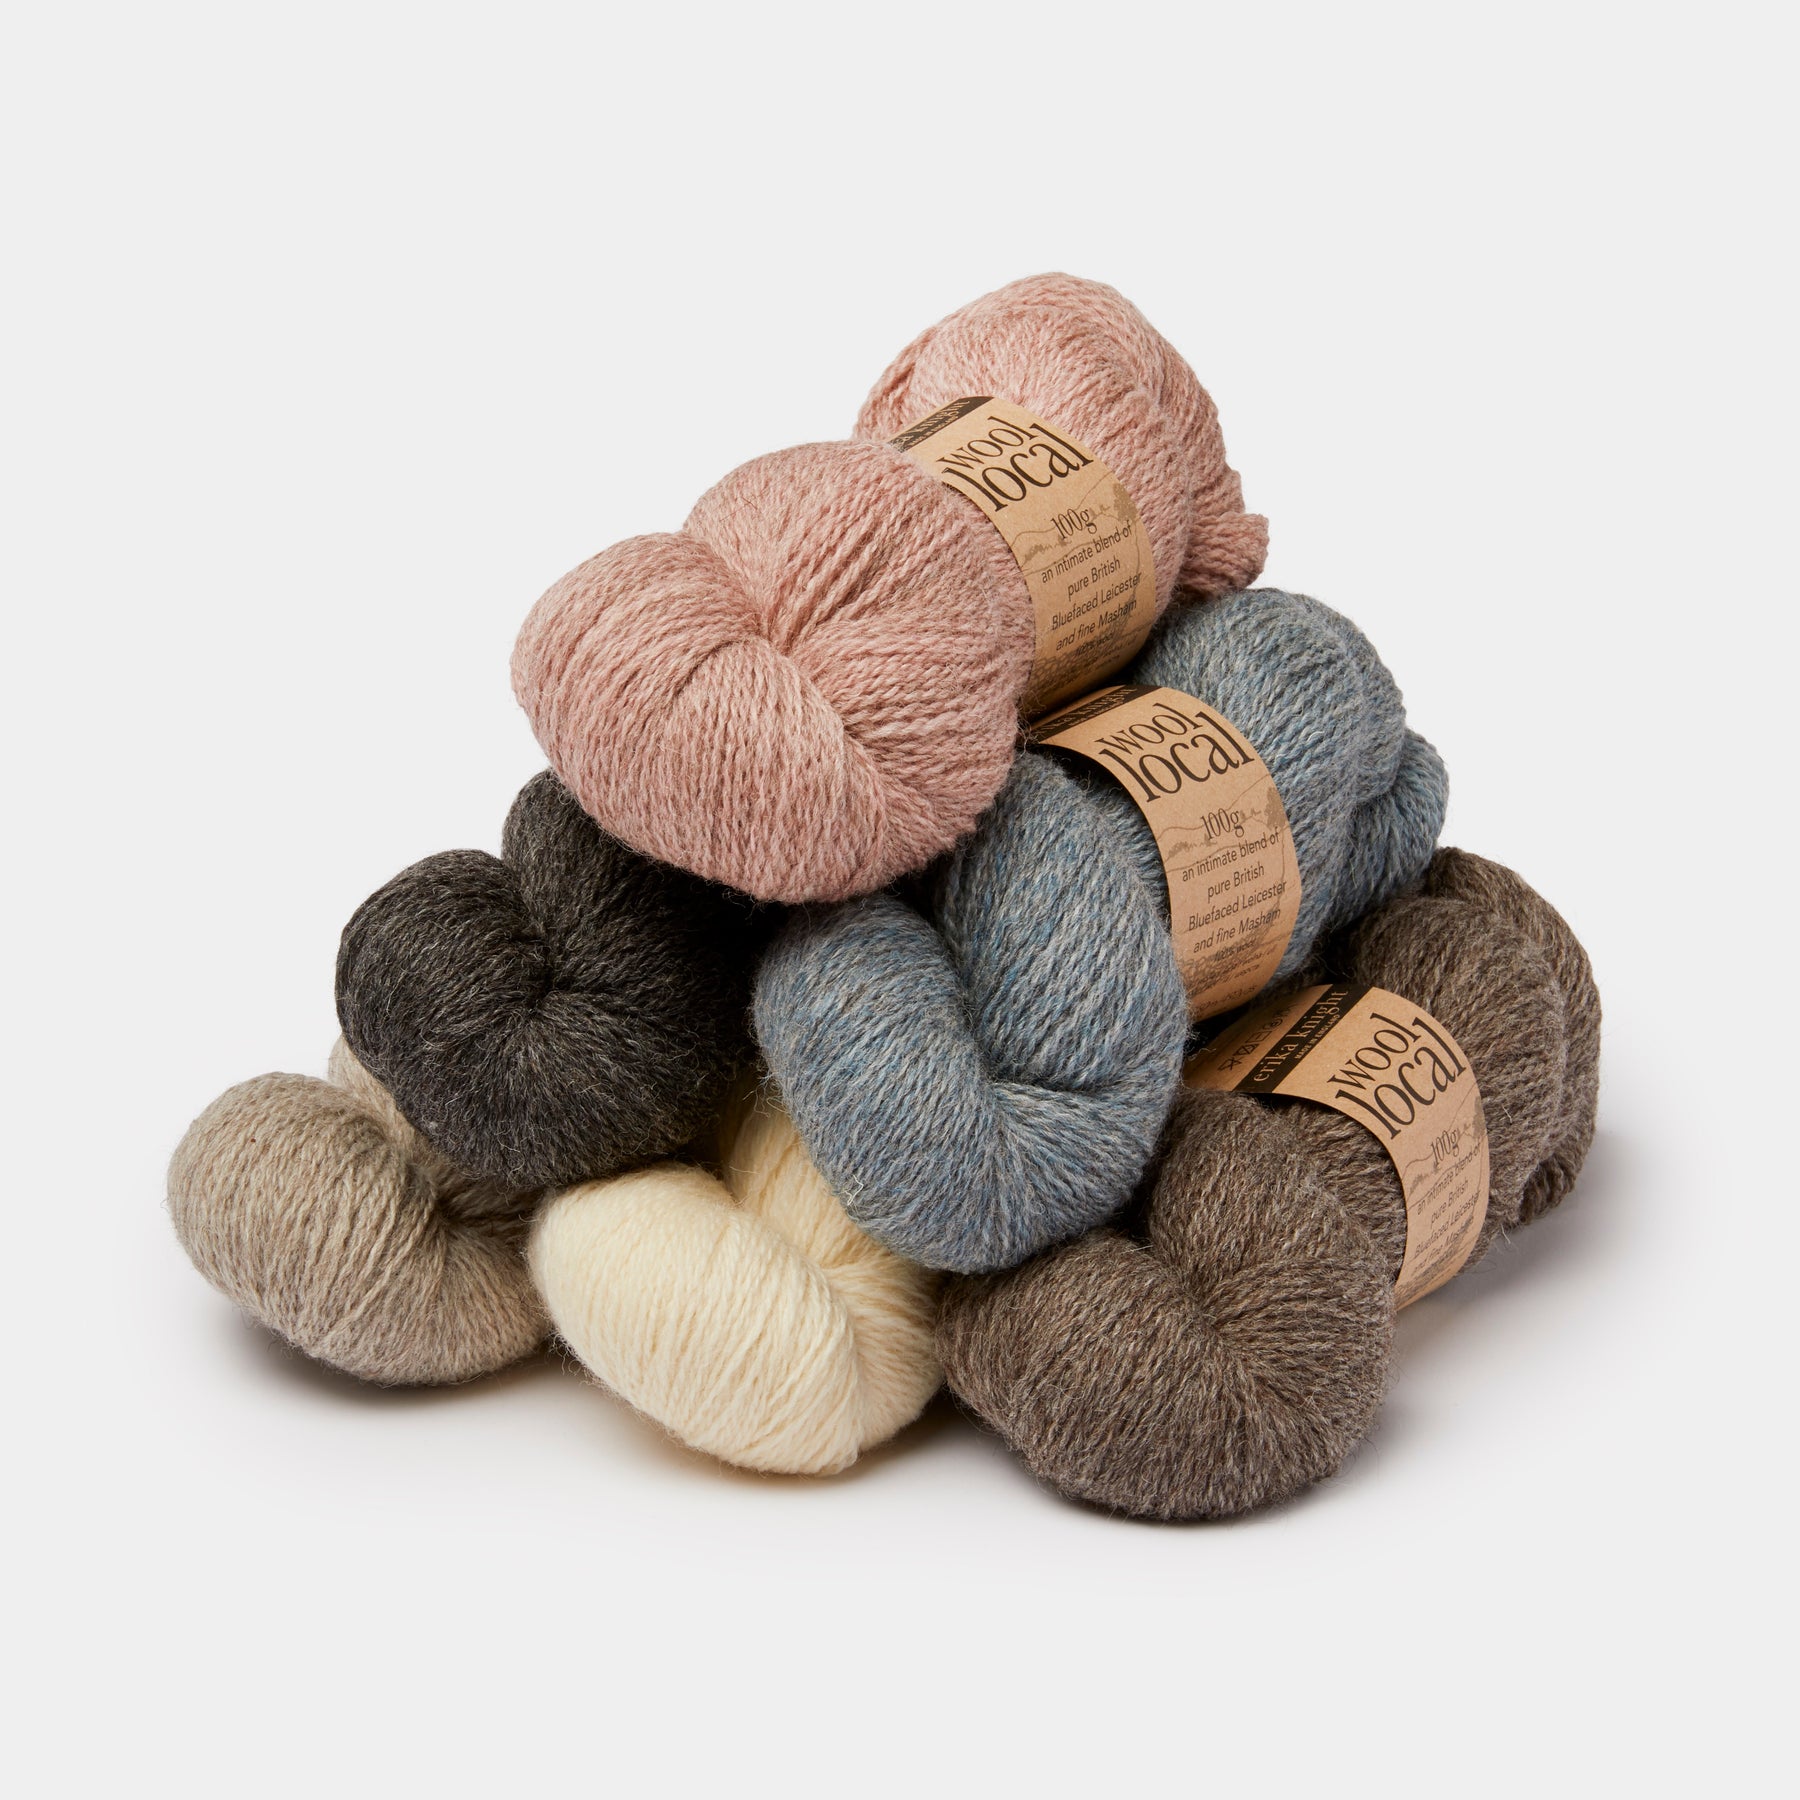 Erika Knight Wool Local: A Sustainably Sourced Yarn